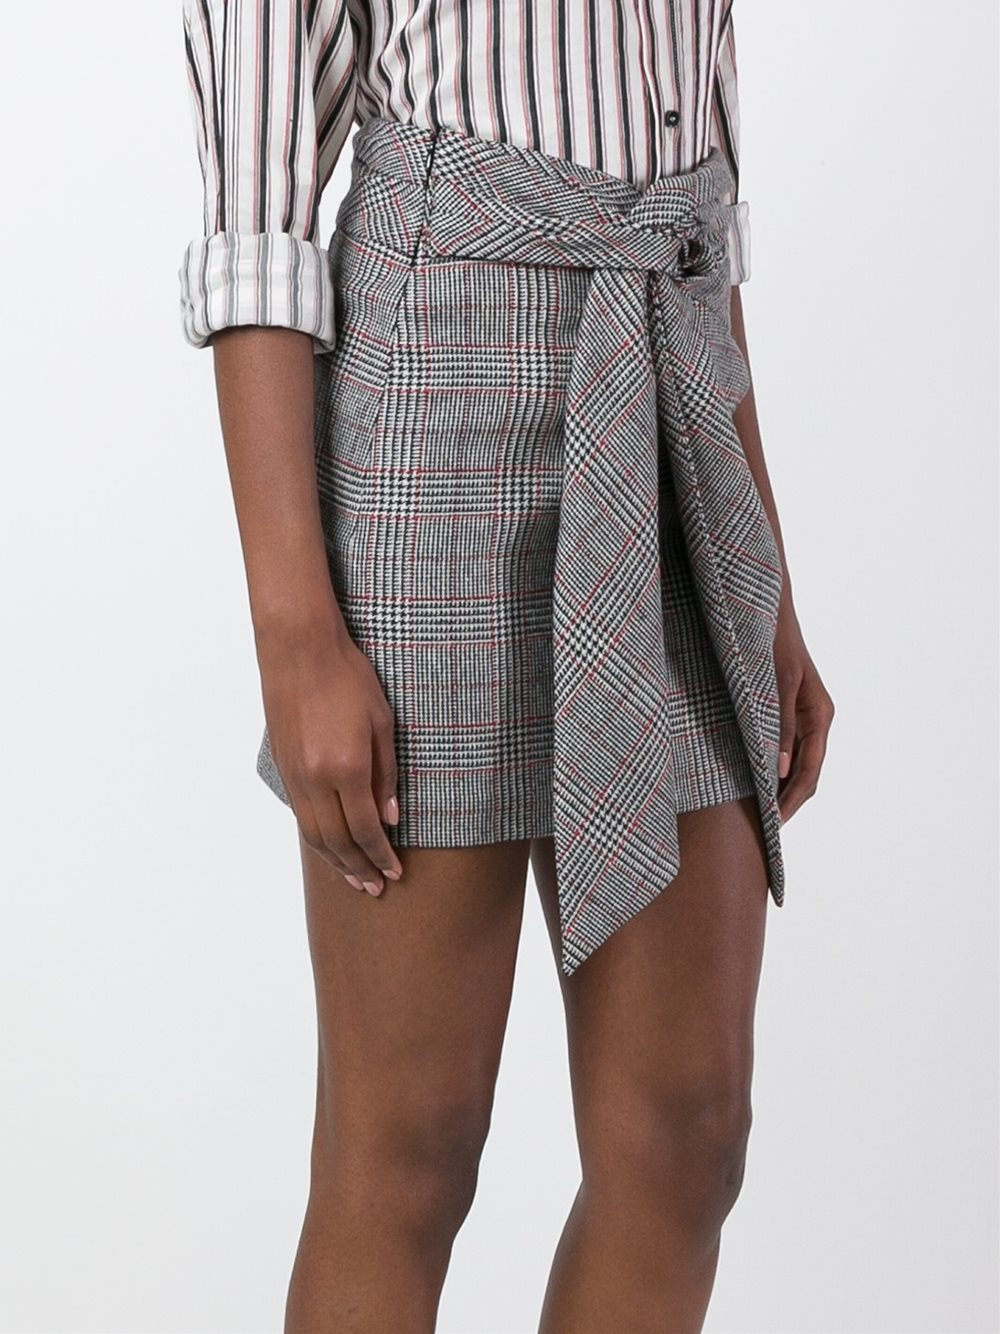 Lyst - Isabel Marant 'kim' Checked Knot Skirt in Gray